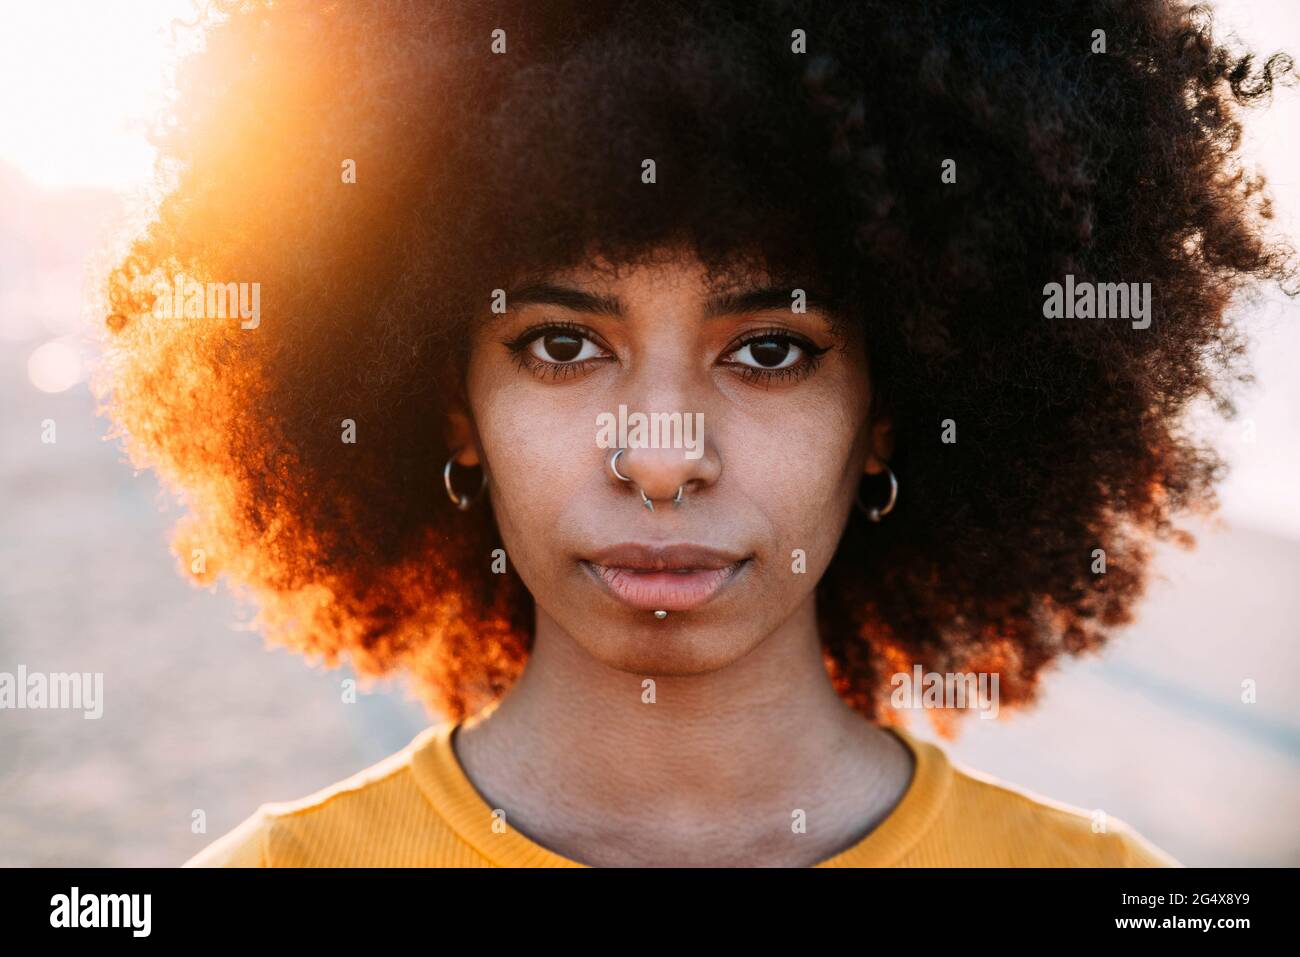 Afro woman with pierced nose during sunset Stock Photo